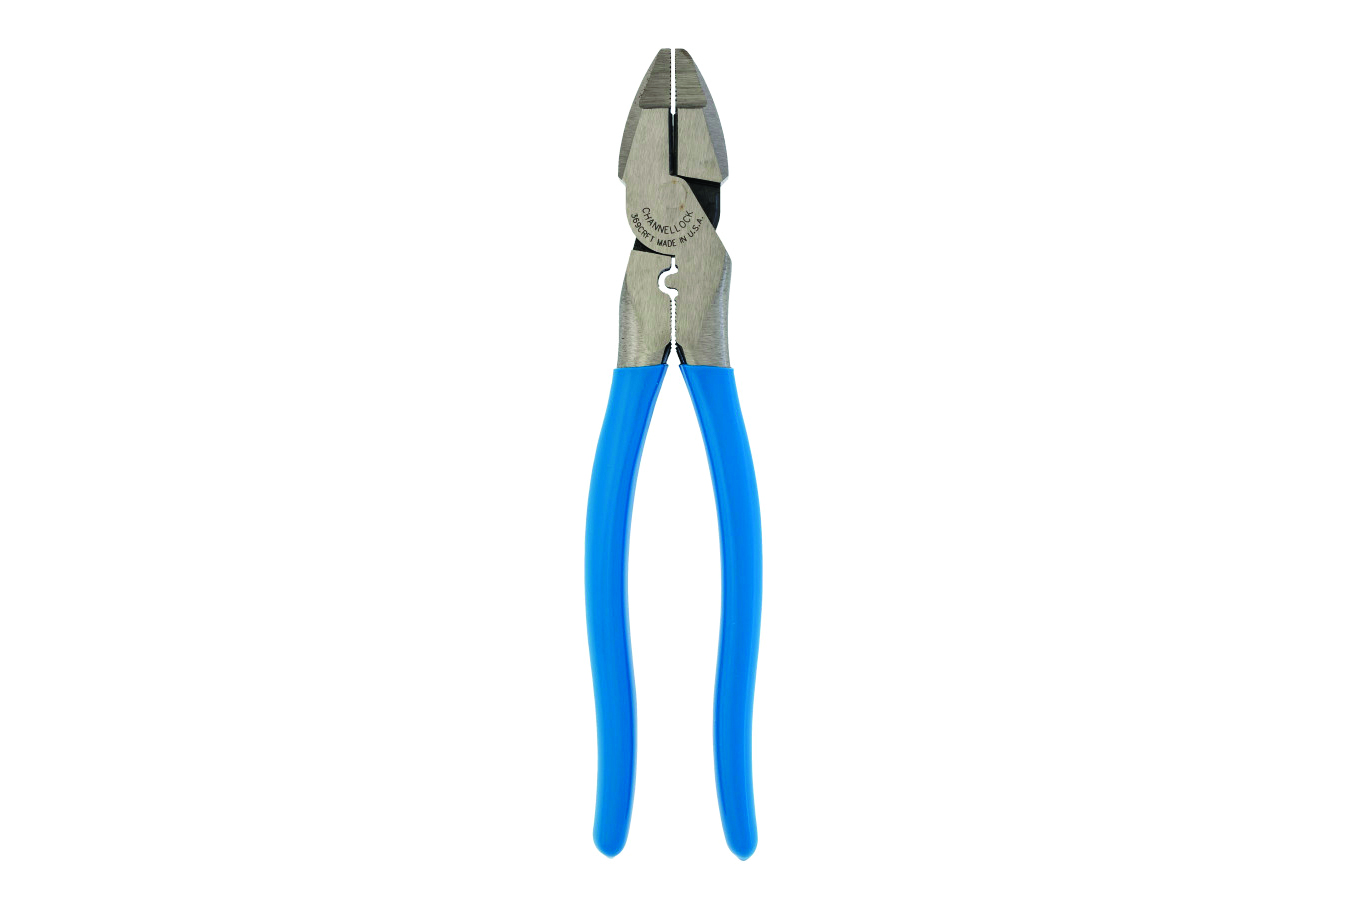 Pliers with blue handles. Image by Channellock.